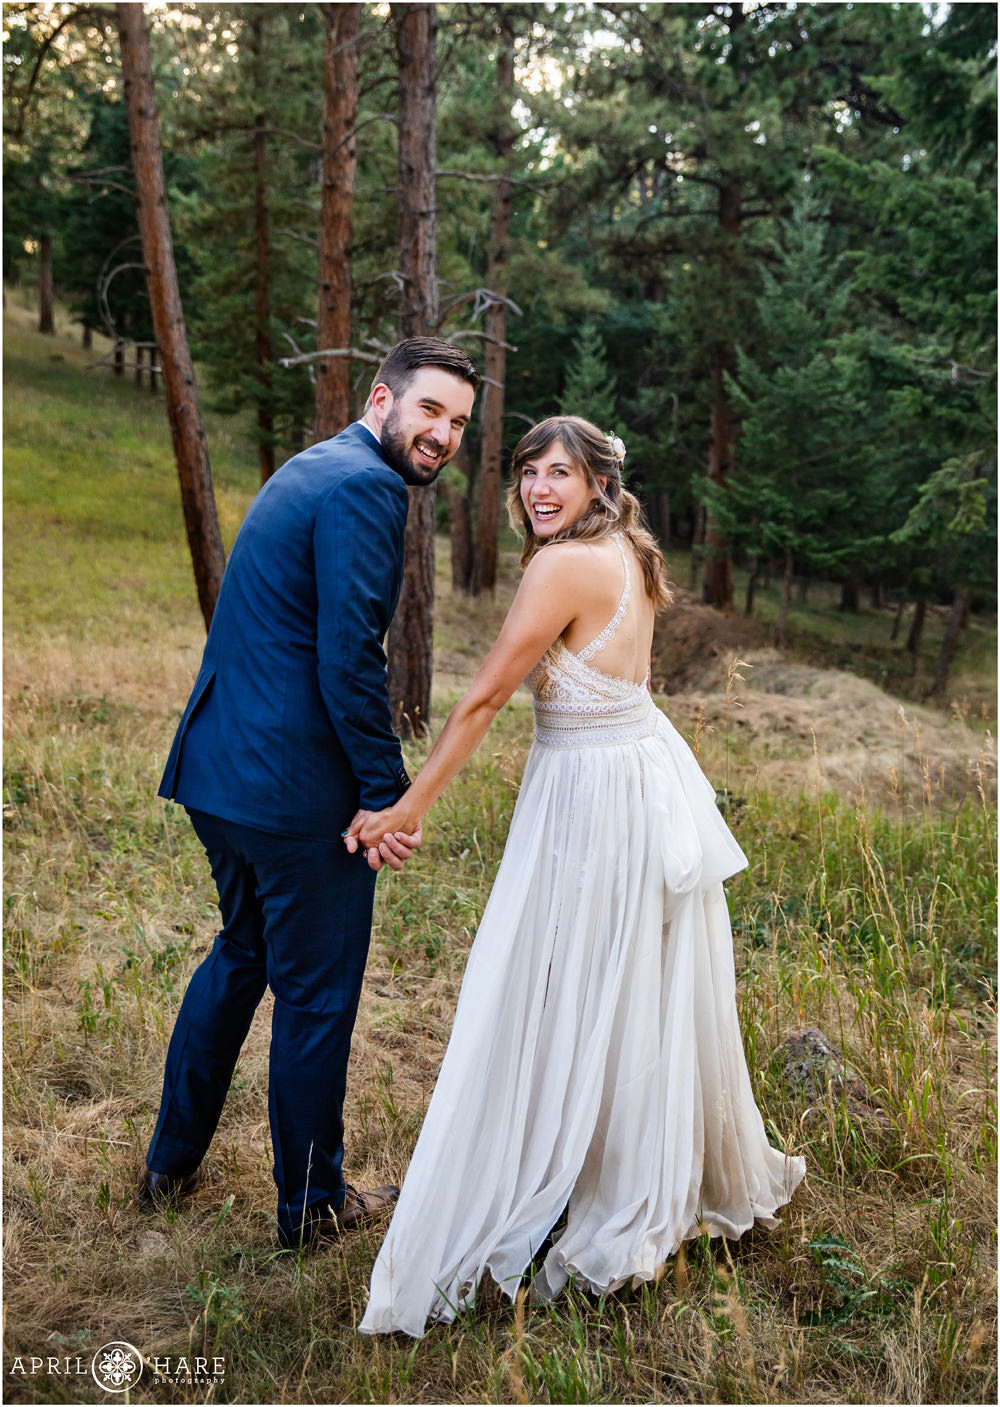 Bride and groom look over their shoulders and laugh on their wedding day in Colorado